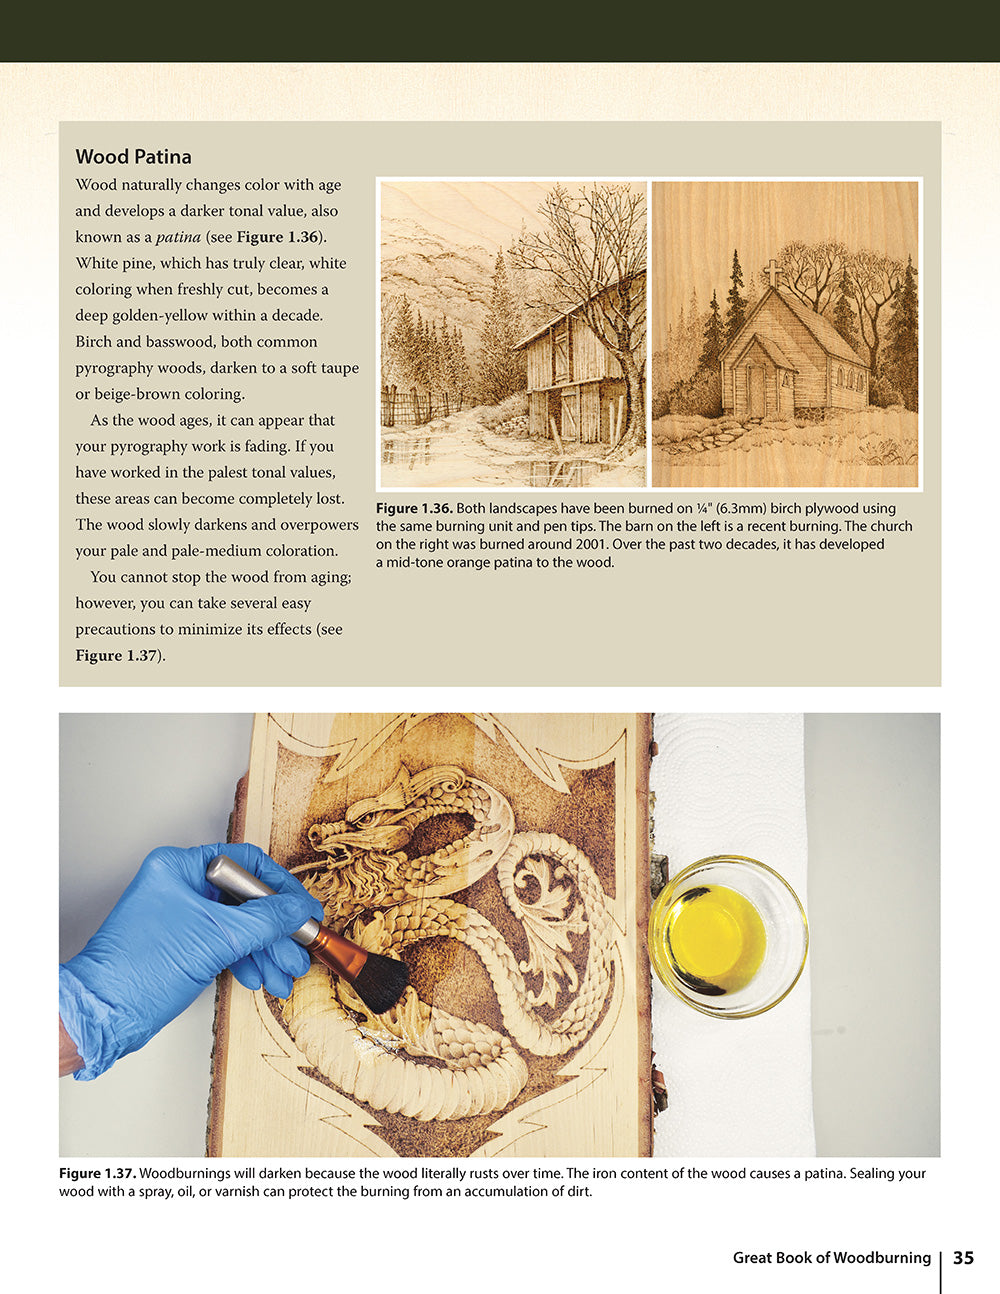 Great Book of Woodburning, Revised and Expanded Second Edition